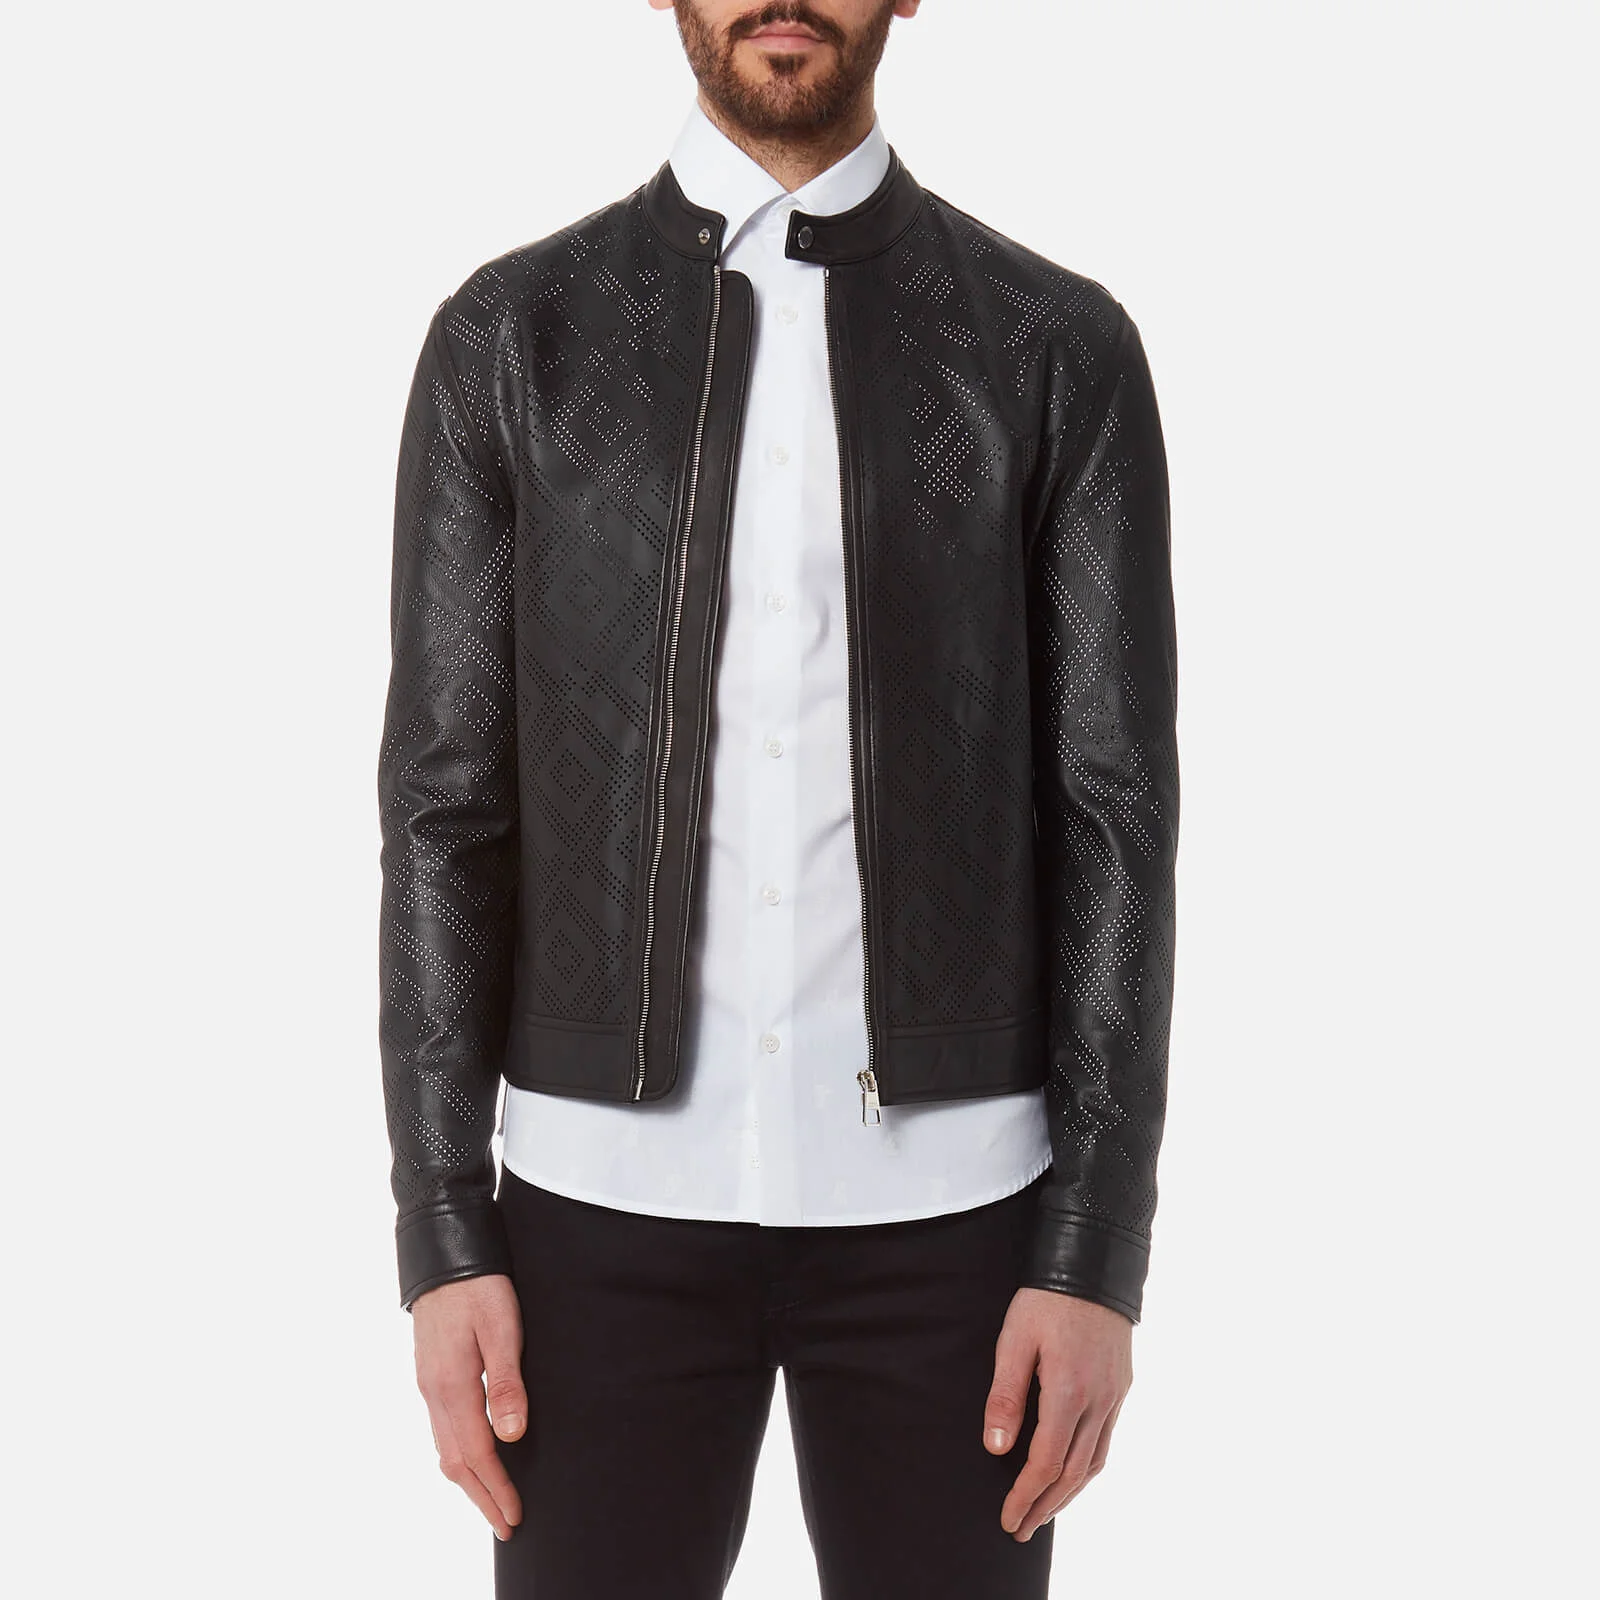 Versace Collection Men's Perforated Leather Jacket - Nero Image 1